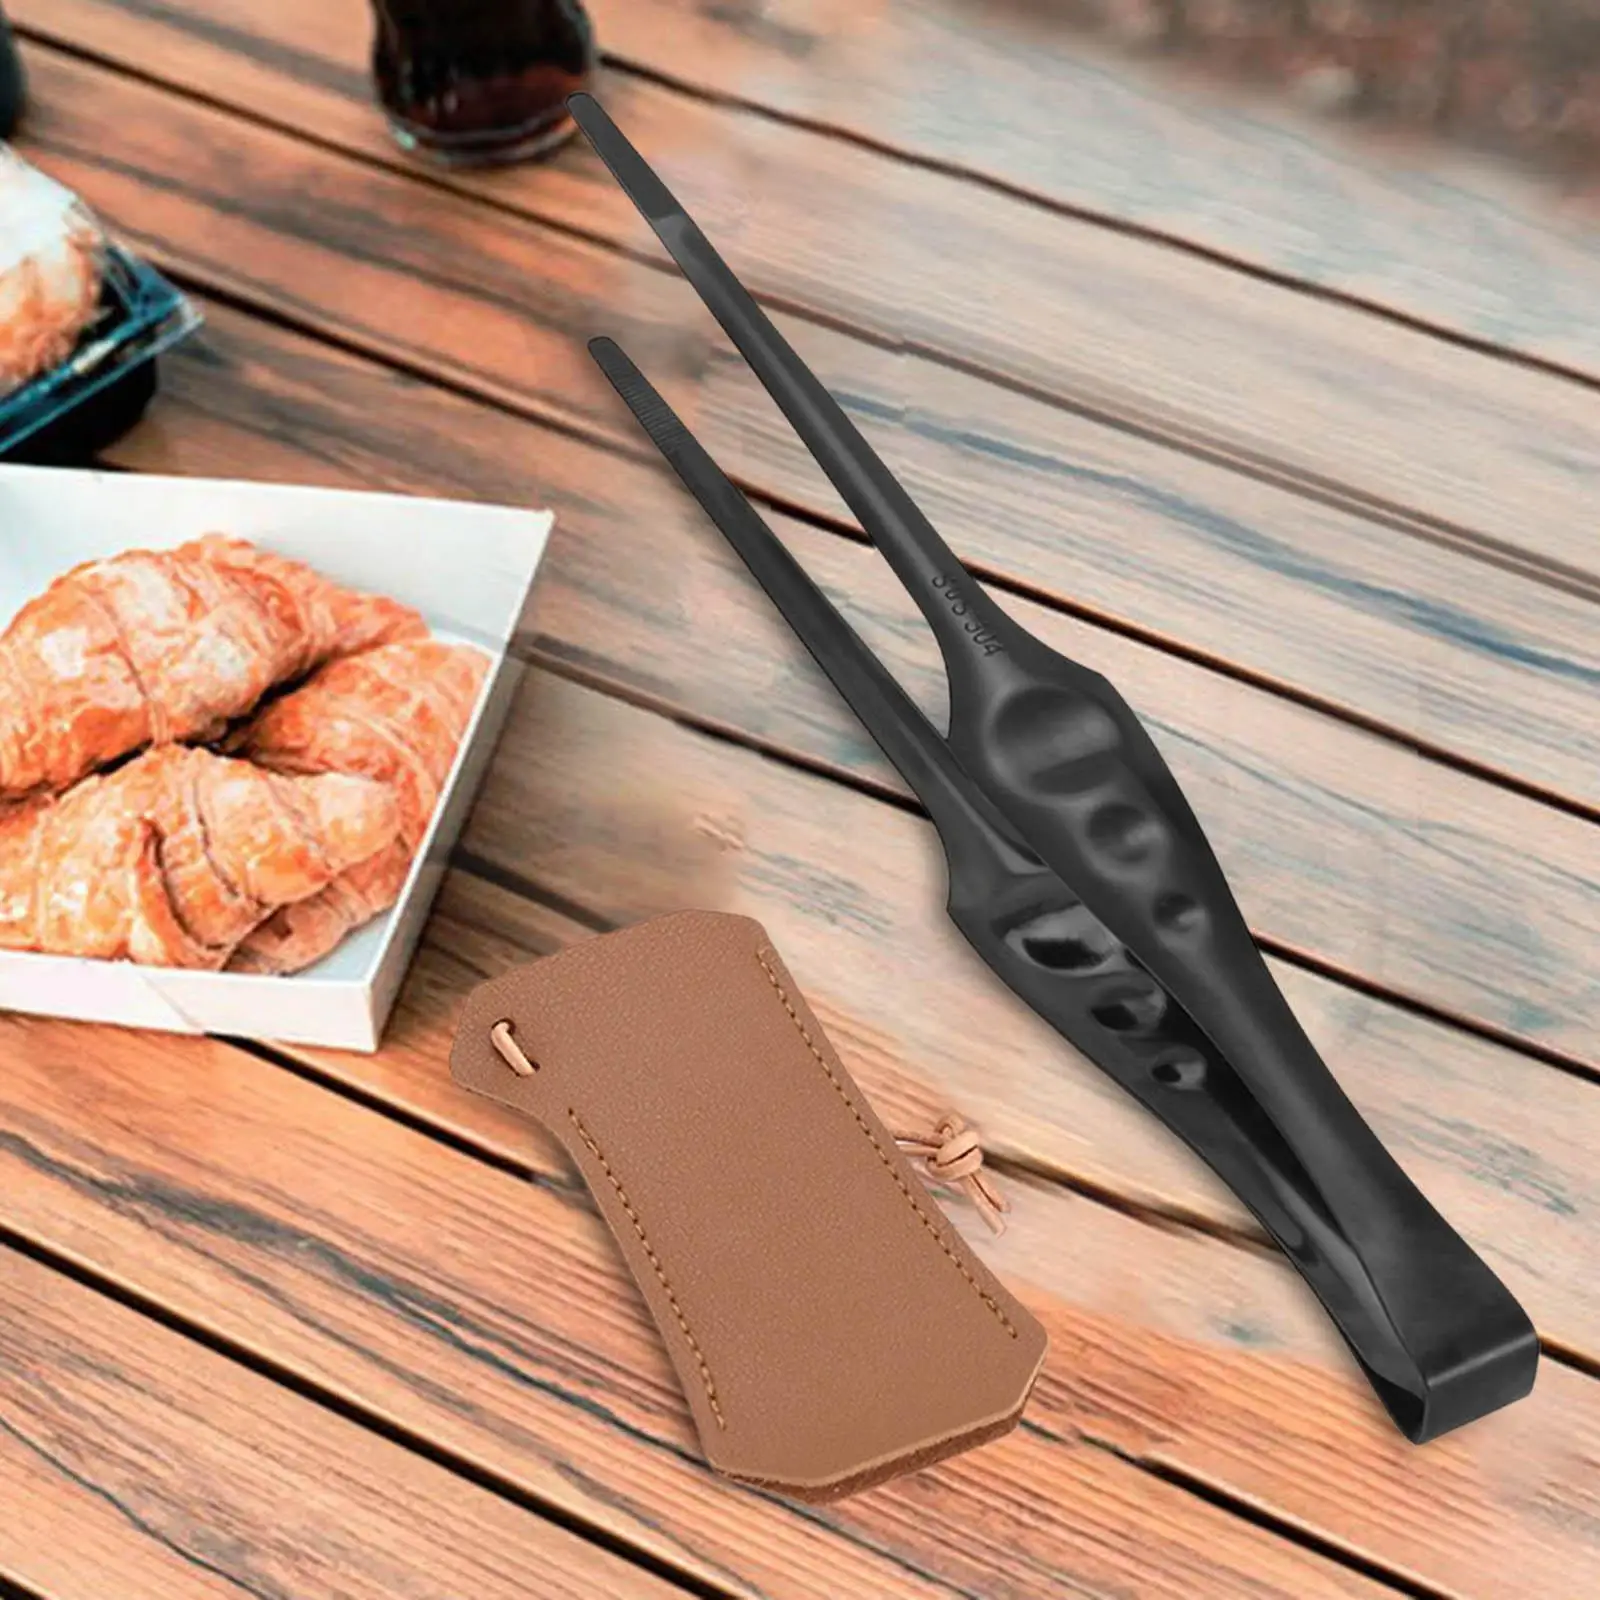 Stainless Steel Grill Tongs with PU Leather Sleeve Case Nonslip Grip Kitchen Tongs for Baking BBQ Buffet Food Parties Camping